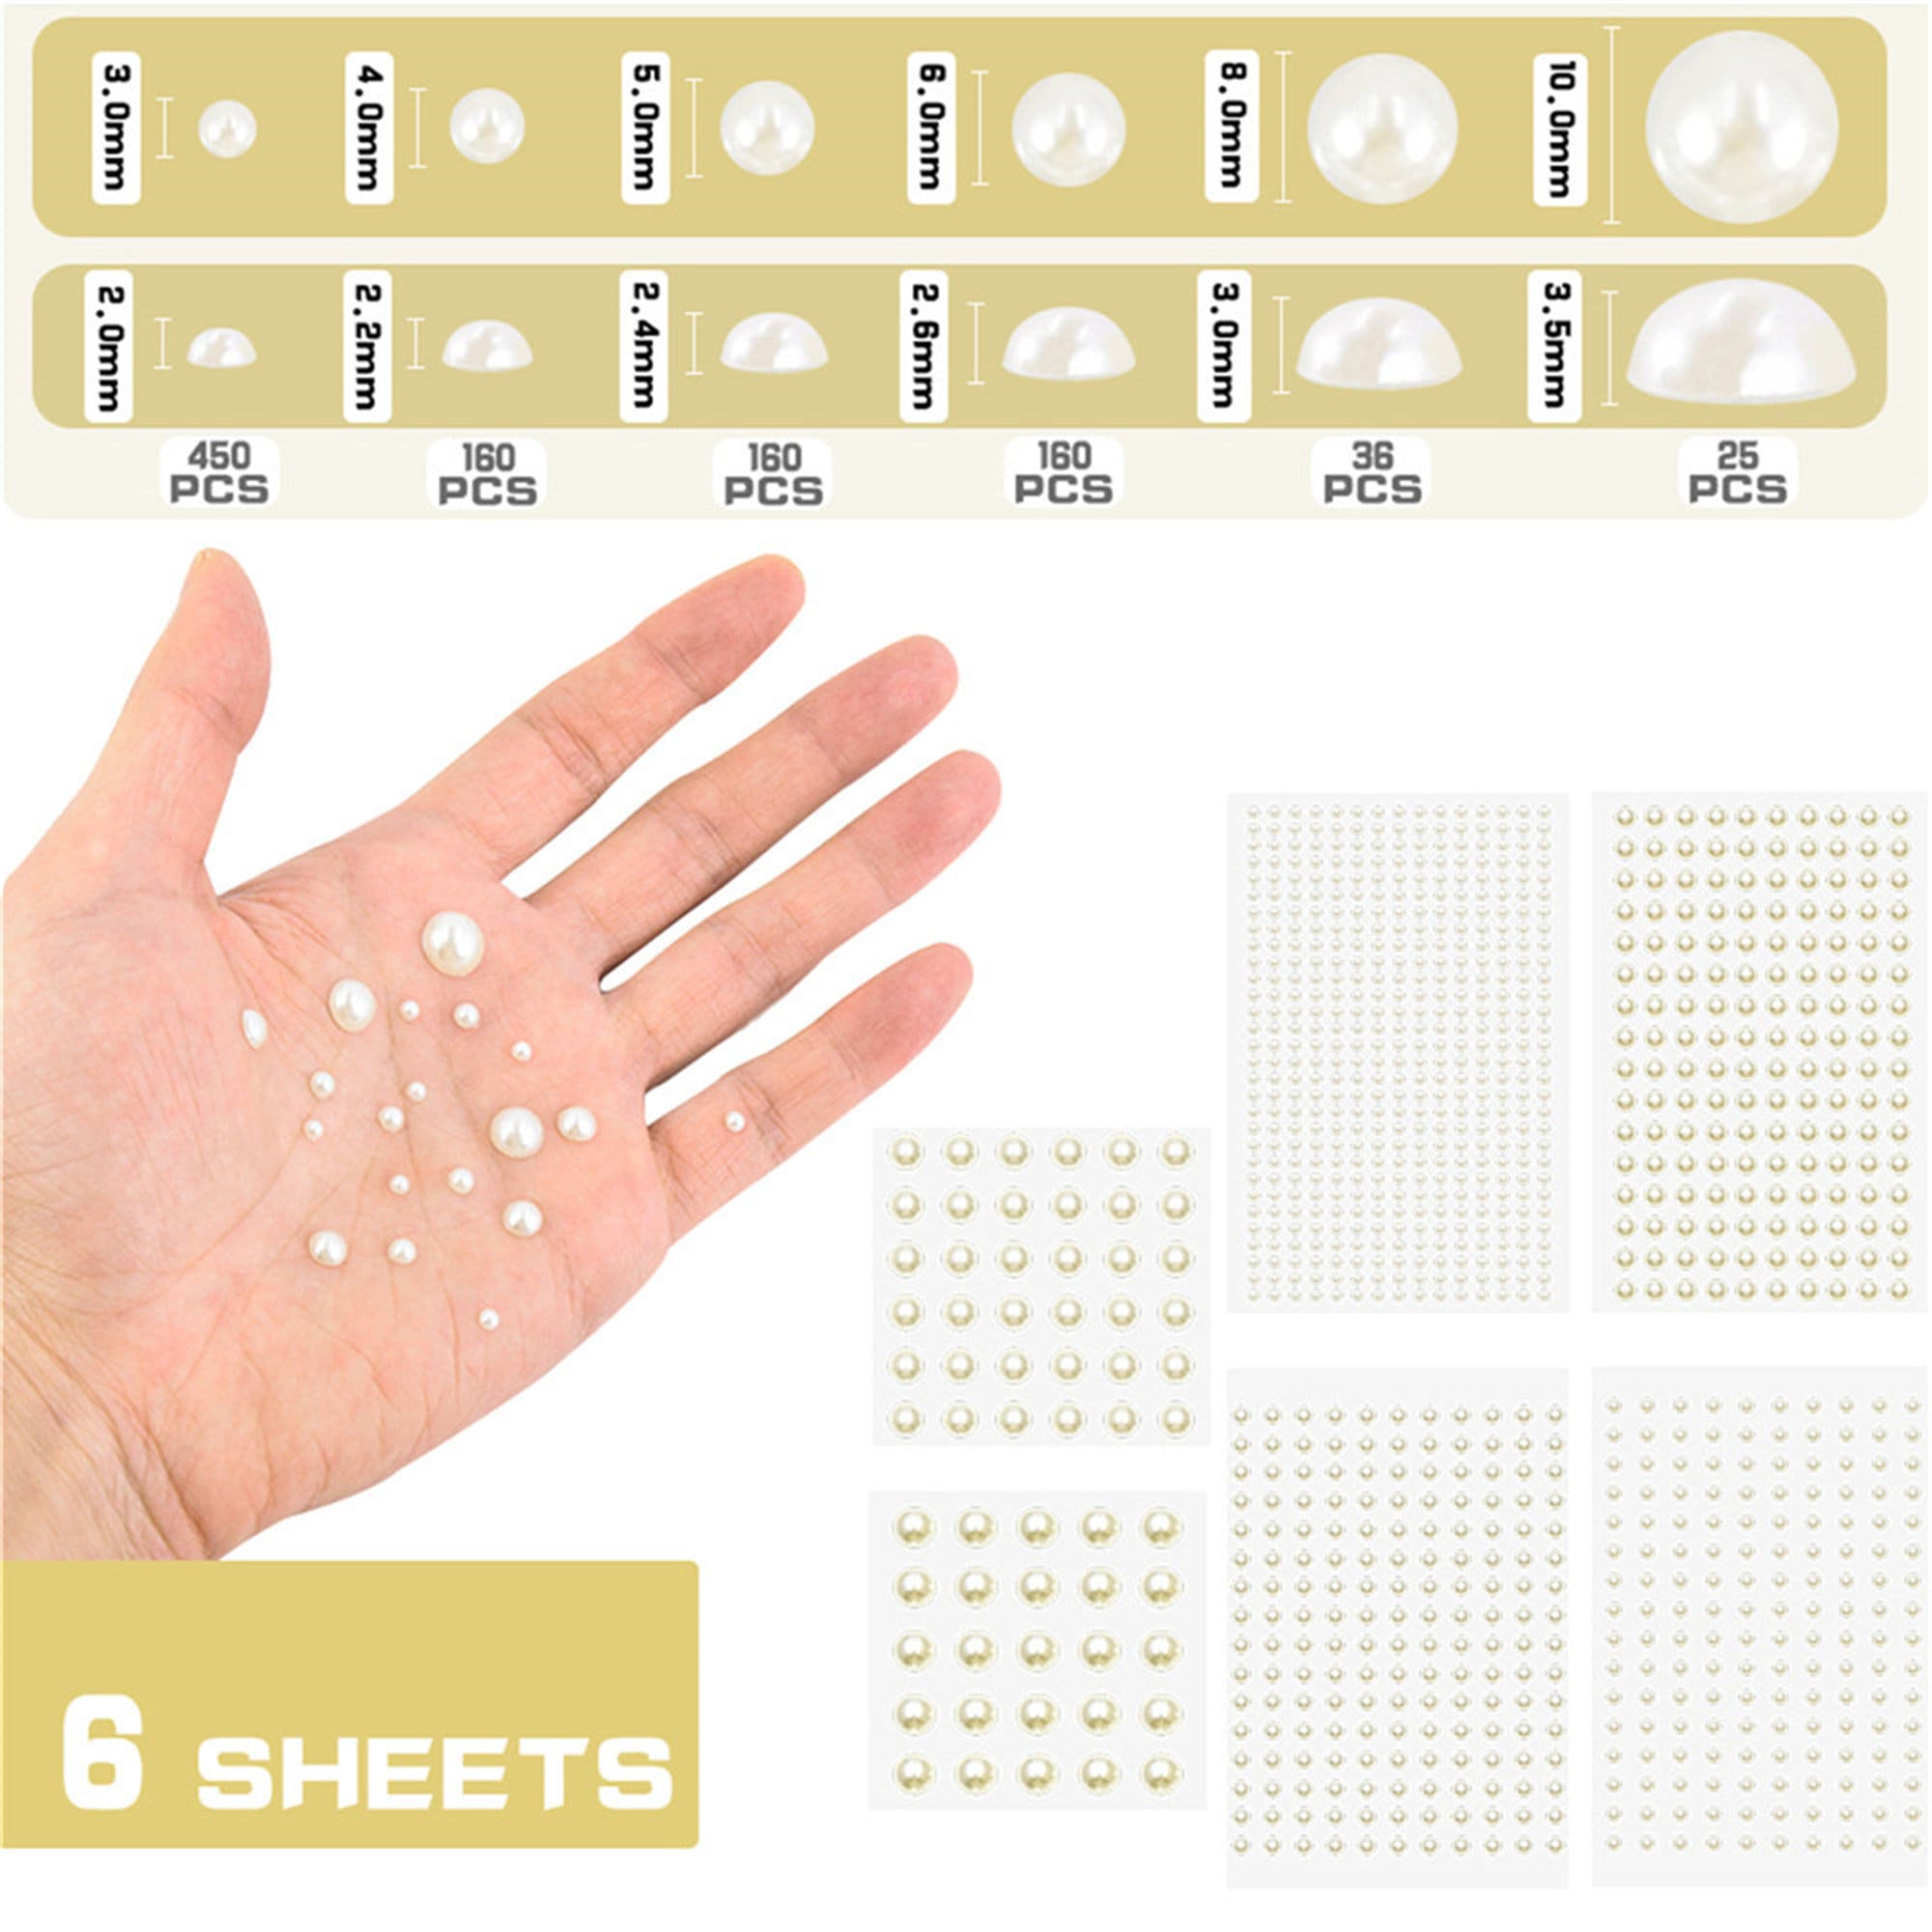 Hair Pearls Stick On Self Adhesive Pearls Stickers Face Pearls Stick C2 ^~